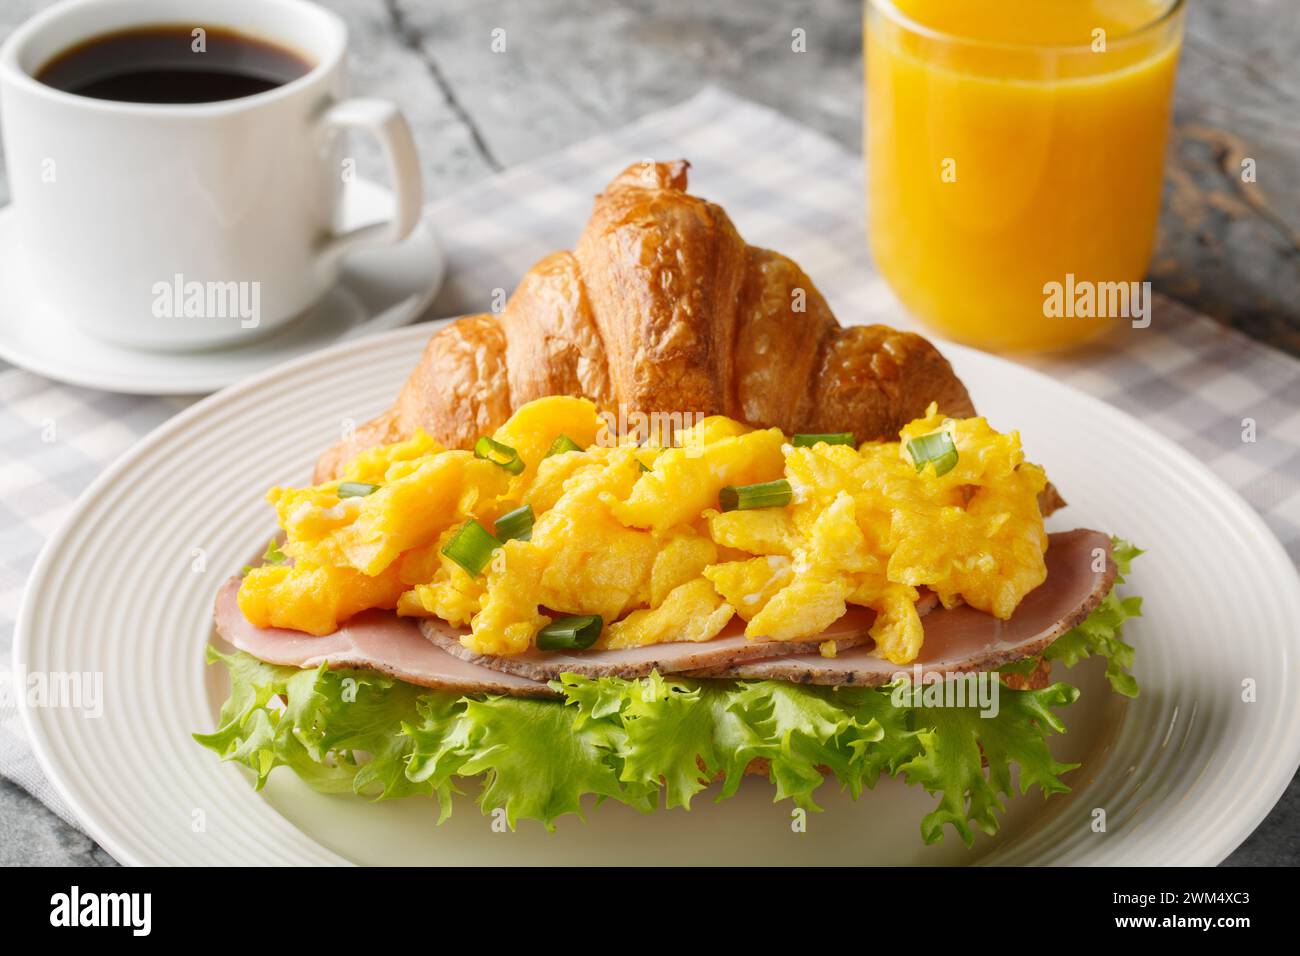 Breakfast Croissant Sandwich with Scrambled Eggs and Ham Served with Orange Juice and Coffee Close-up on a Marble Table. Horizontal Stock Photo